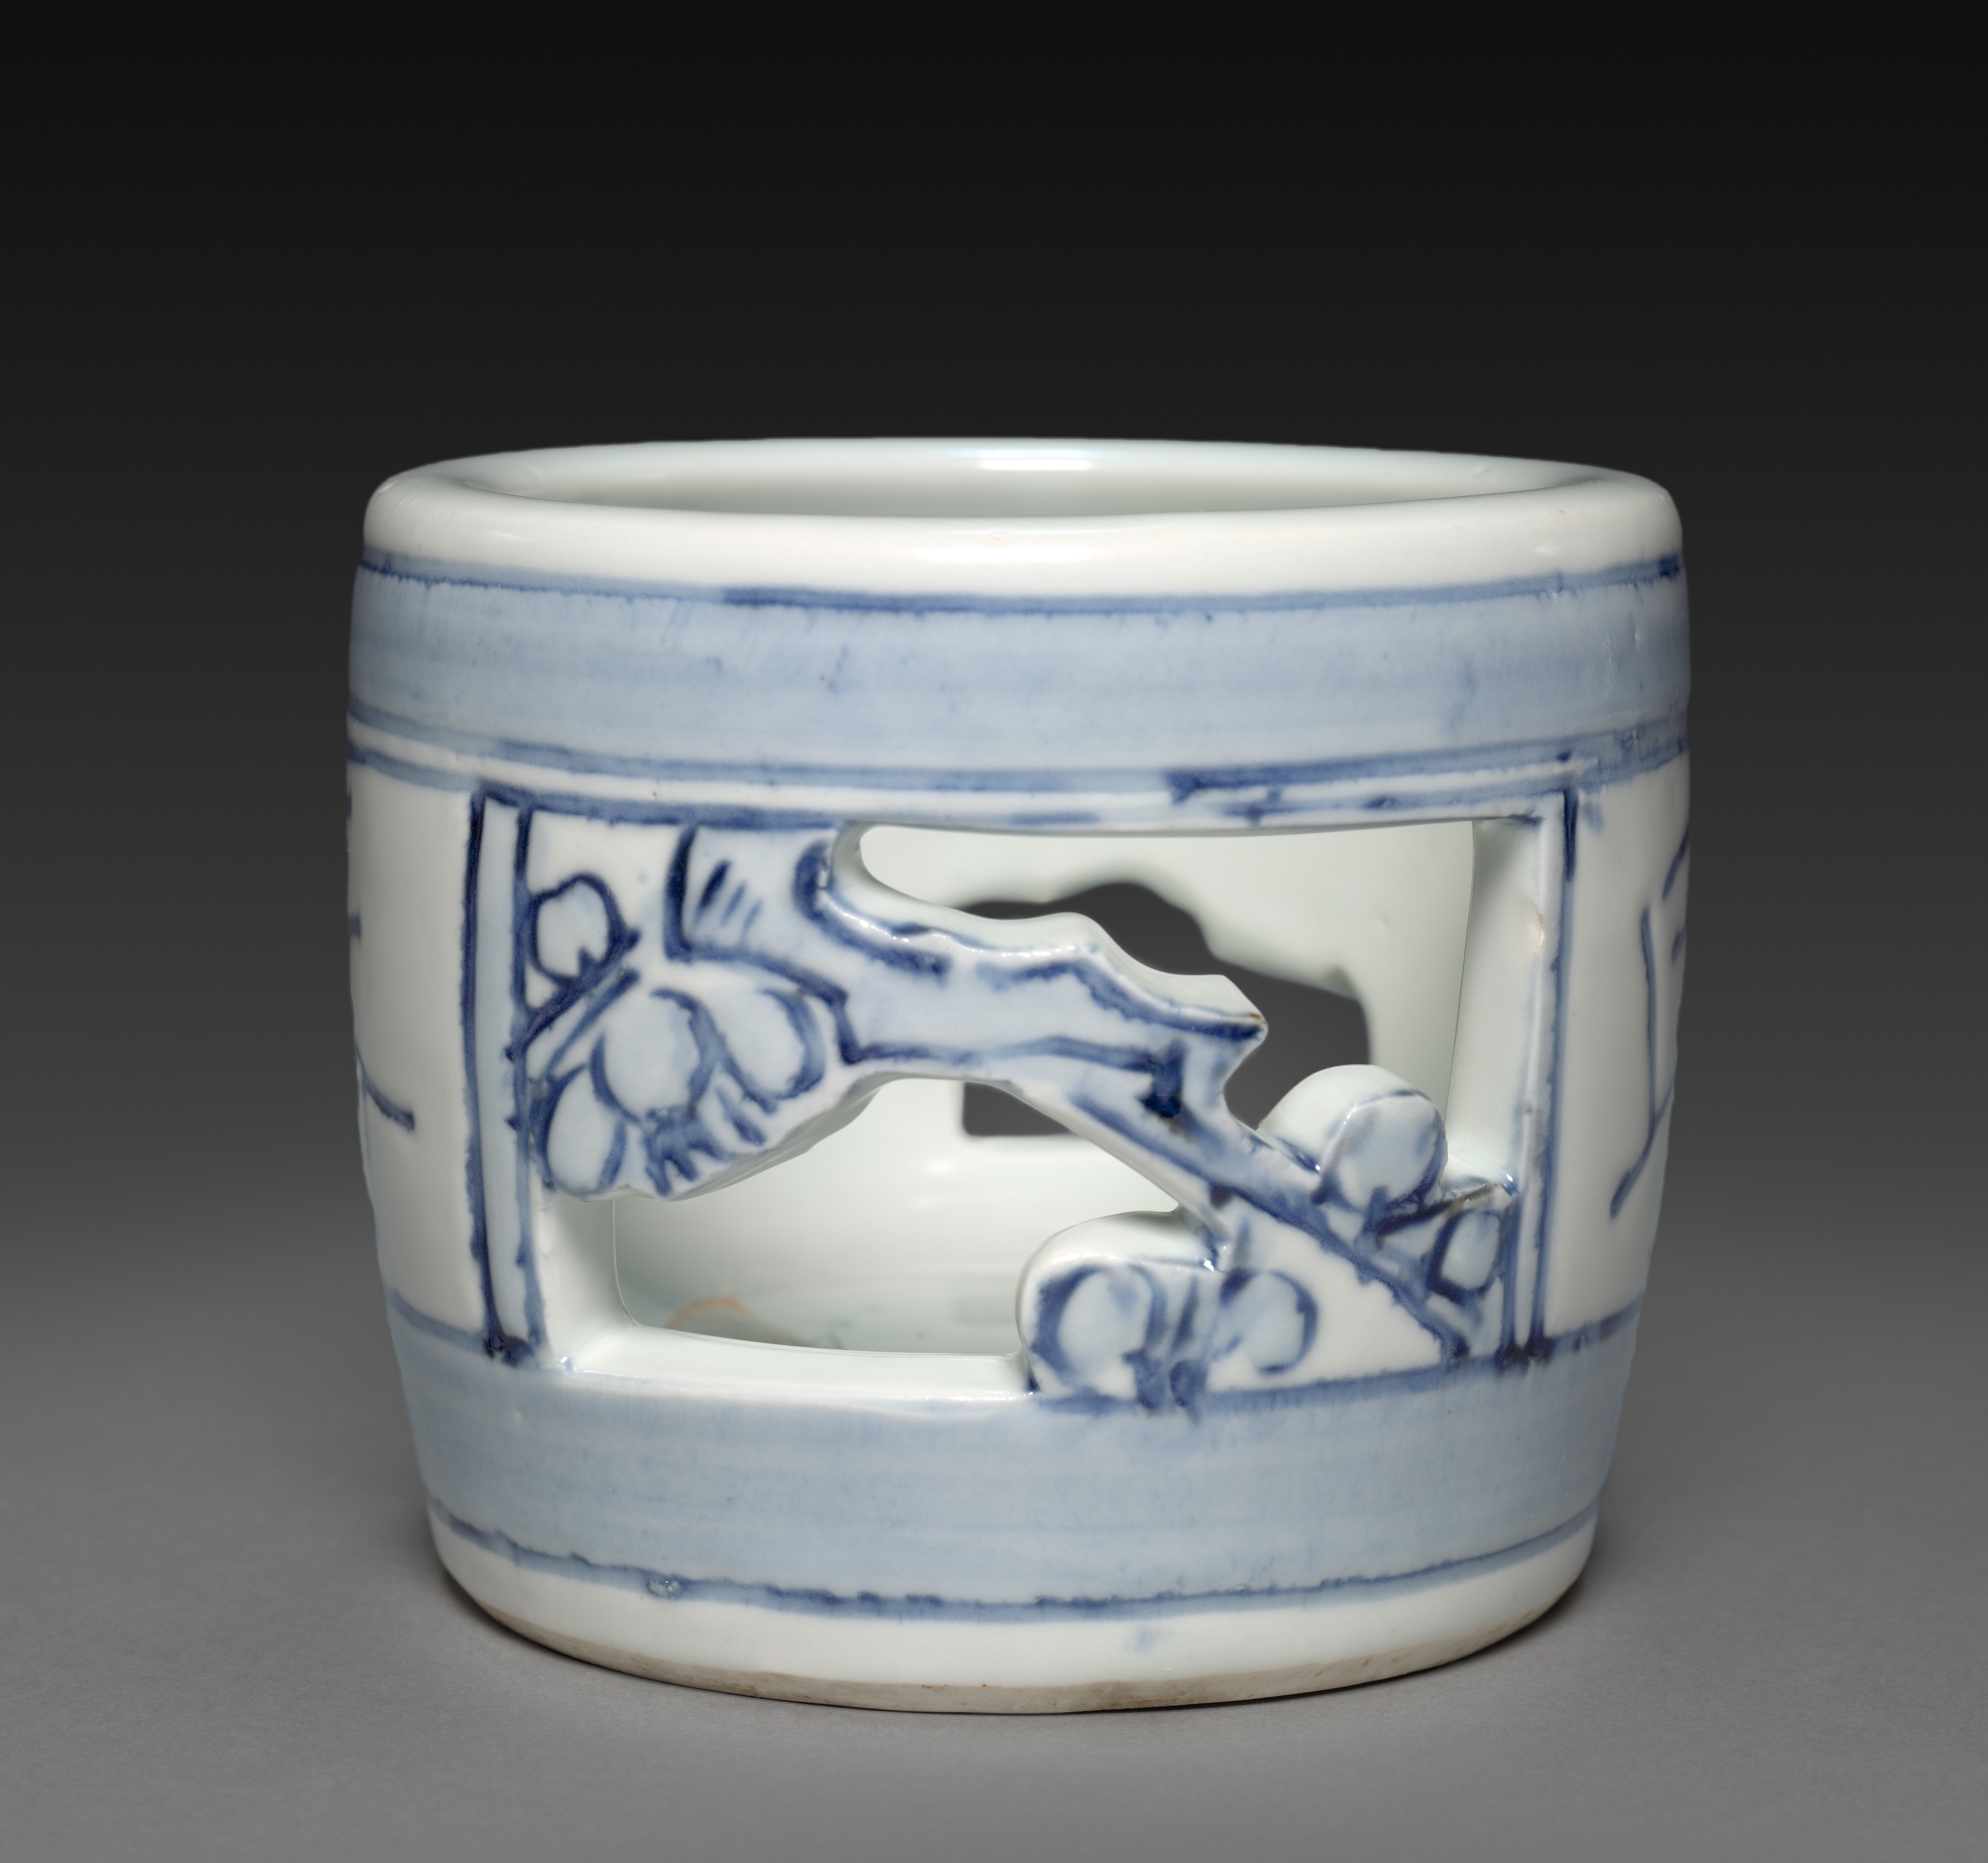 Brush Pot with Carved Panels of Prunus Design and Japanese Characters